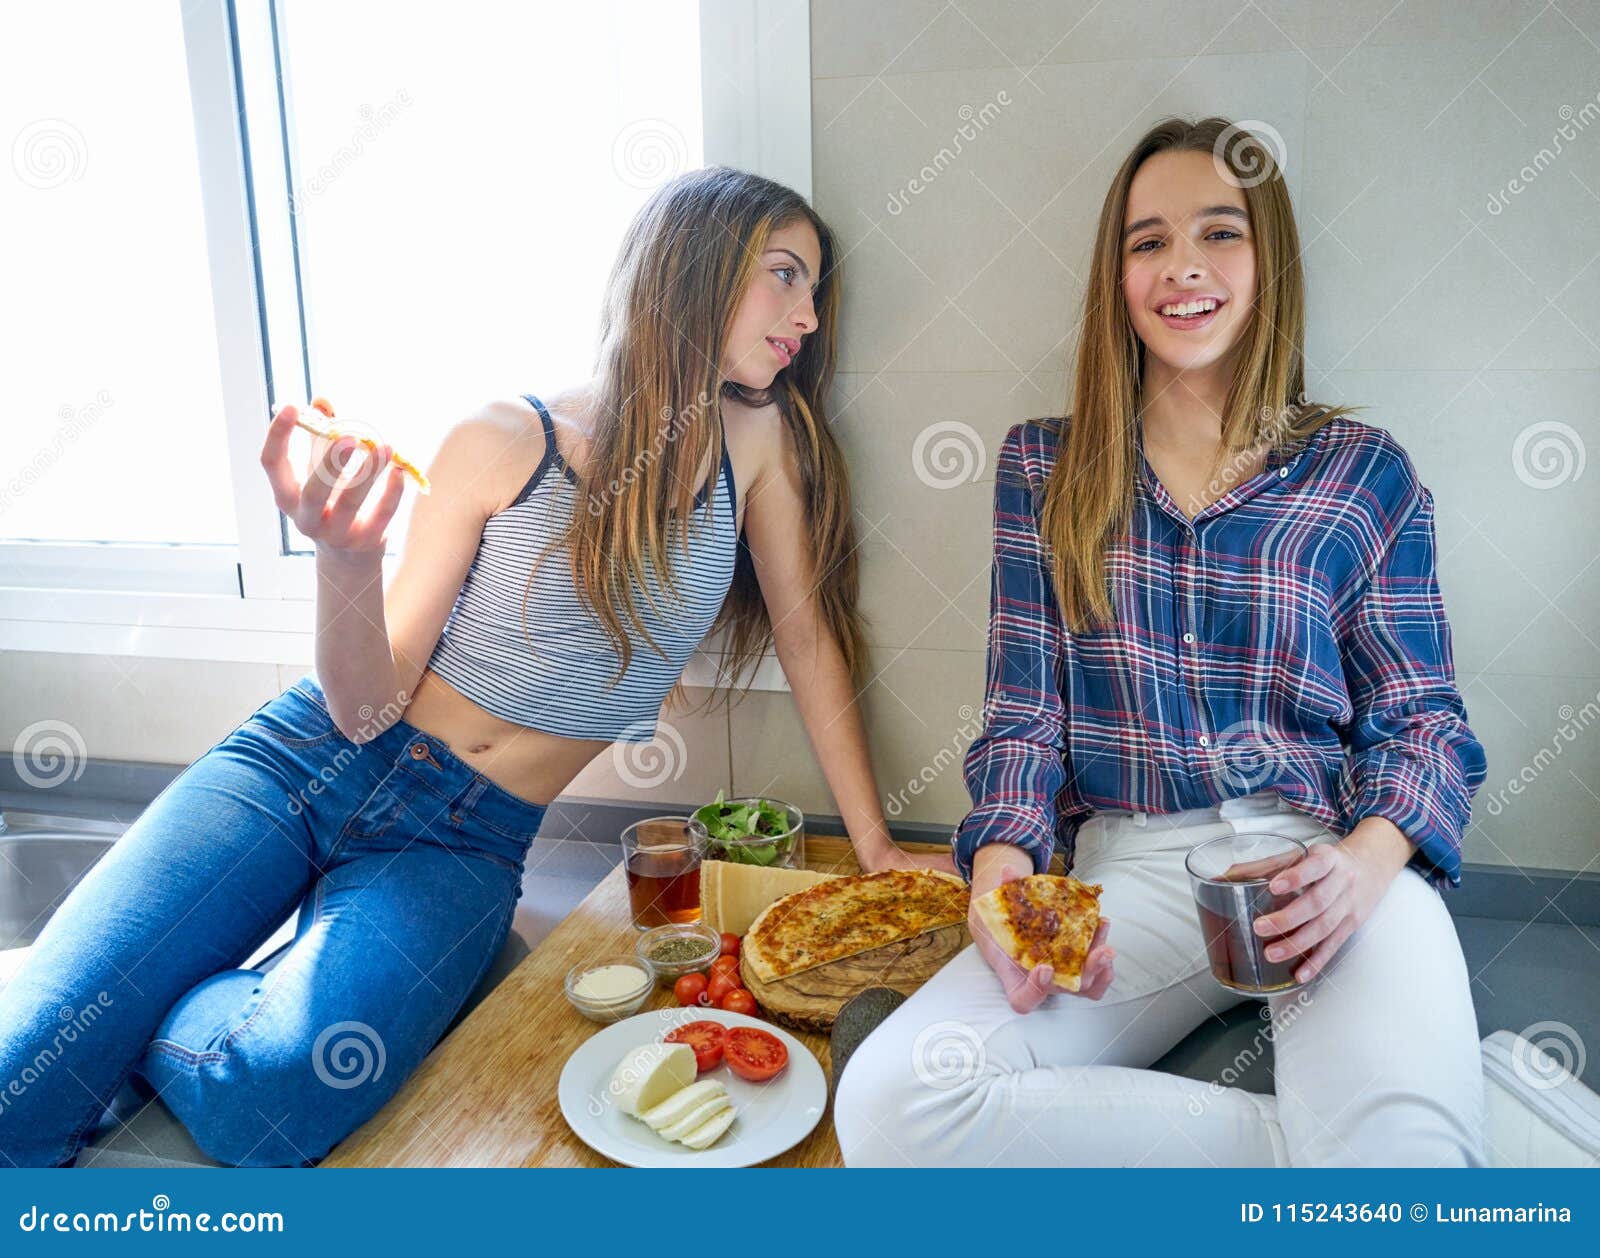 Best Friend Girls Eating Pizza in the Kitchen Stock Photo - Image of ...